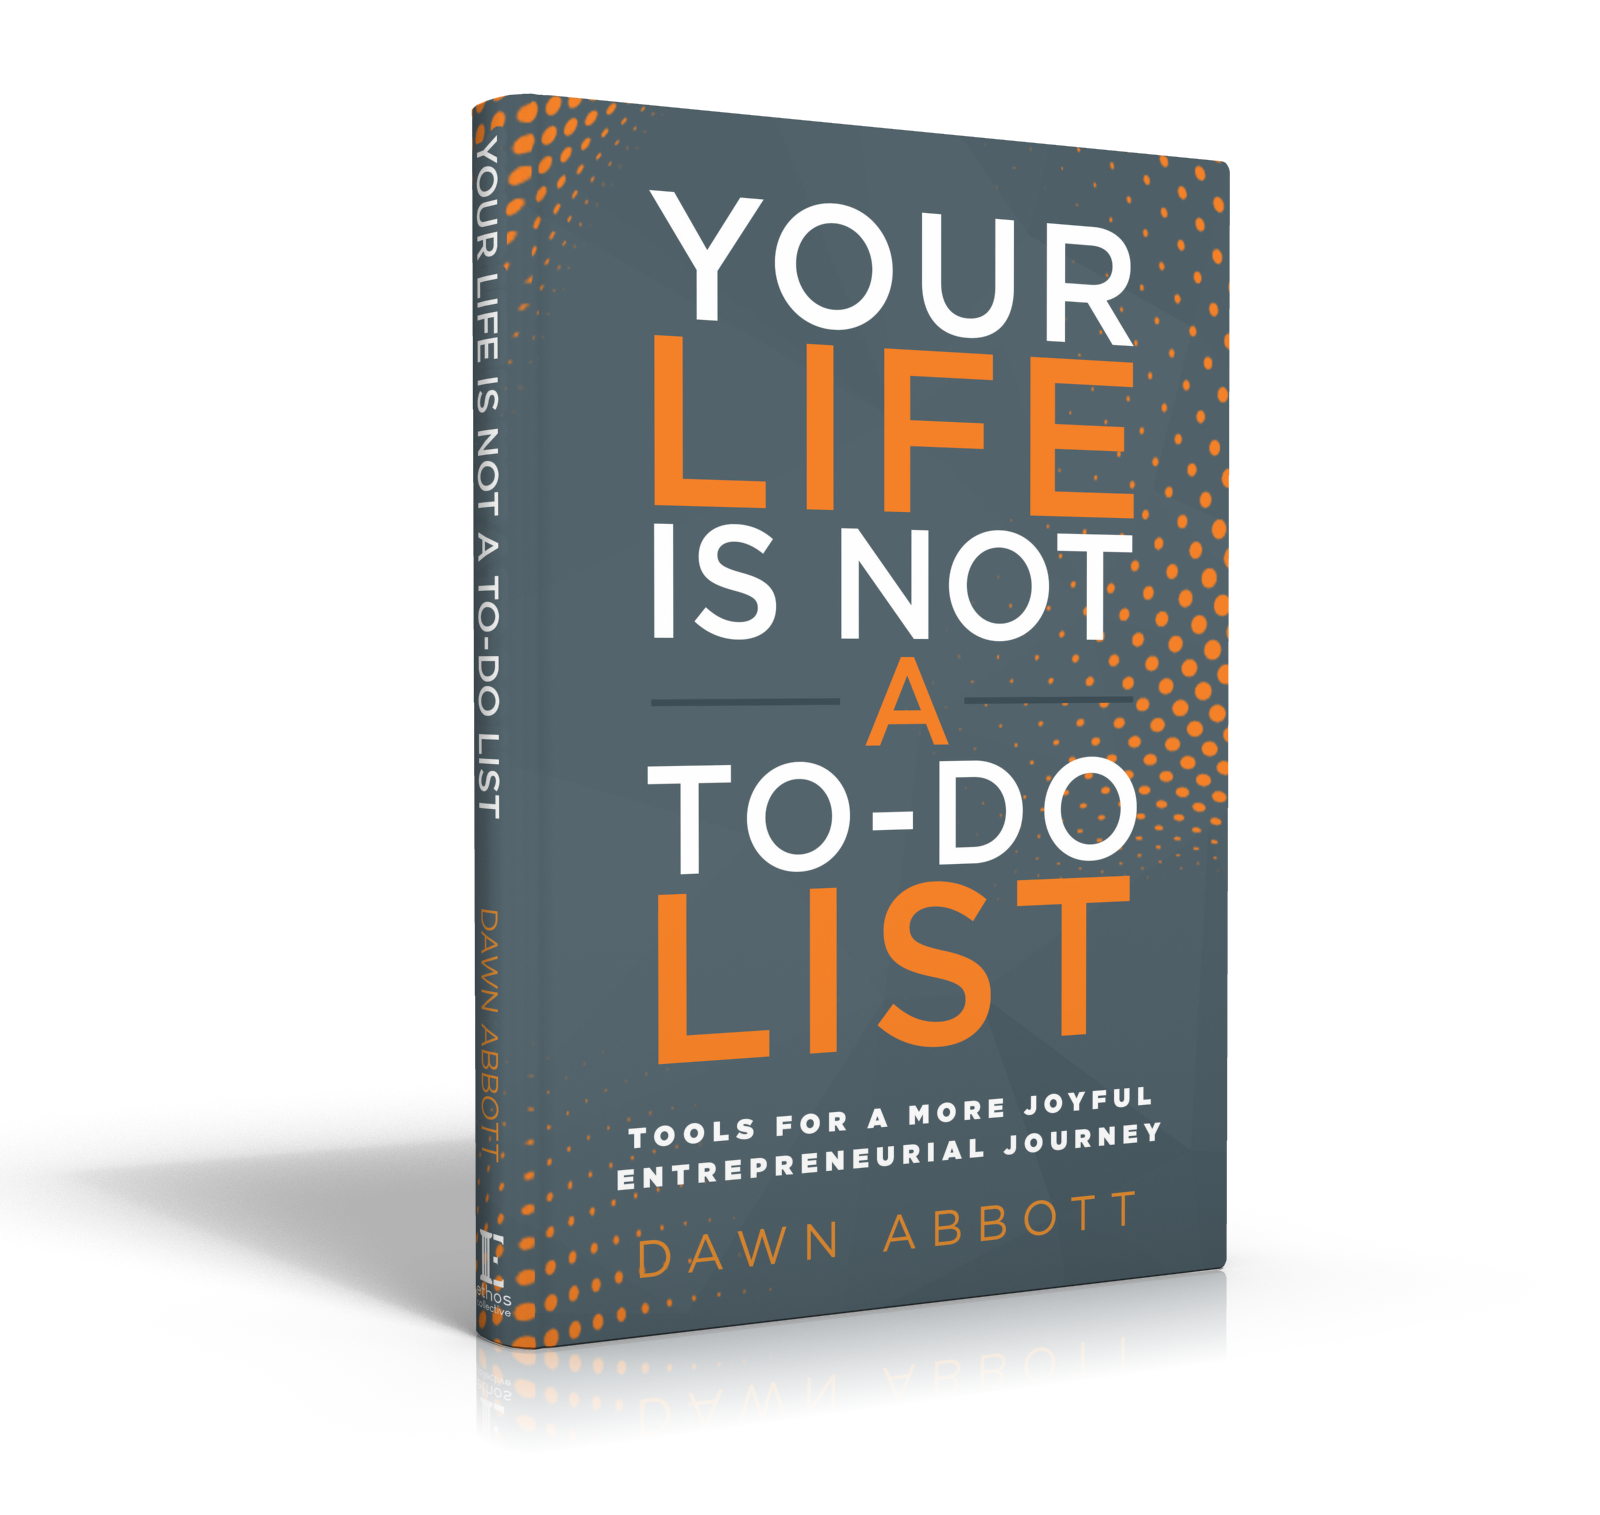 Your Life is not A to-do list